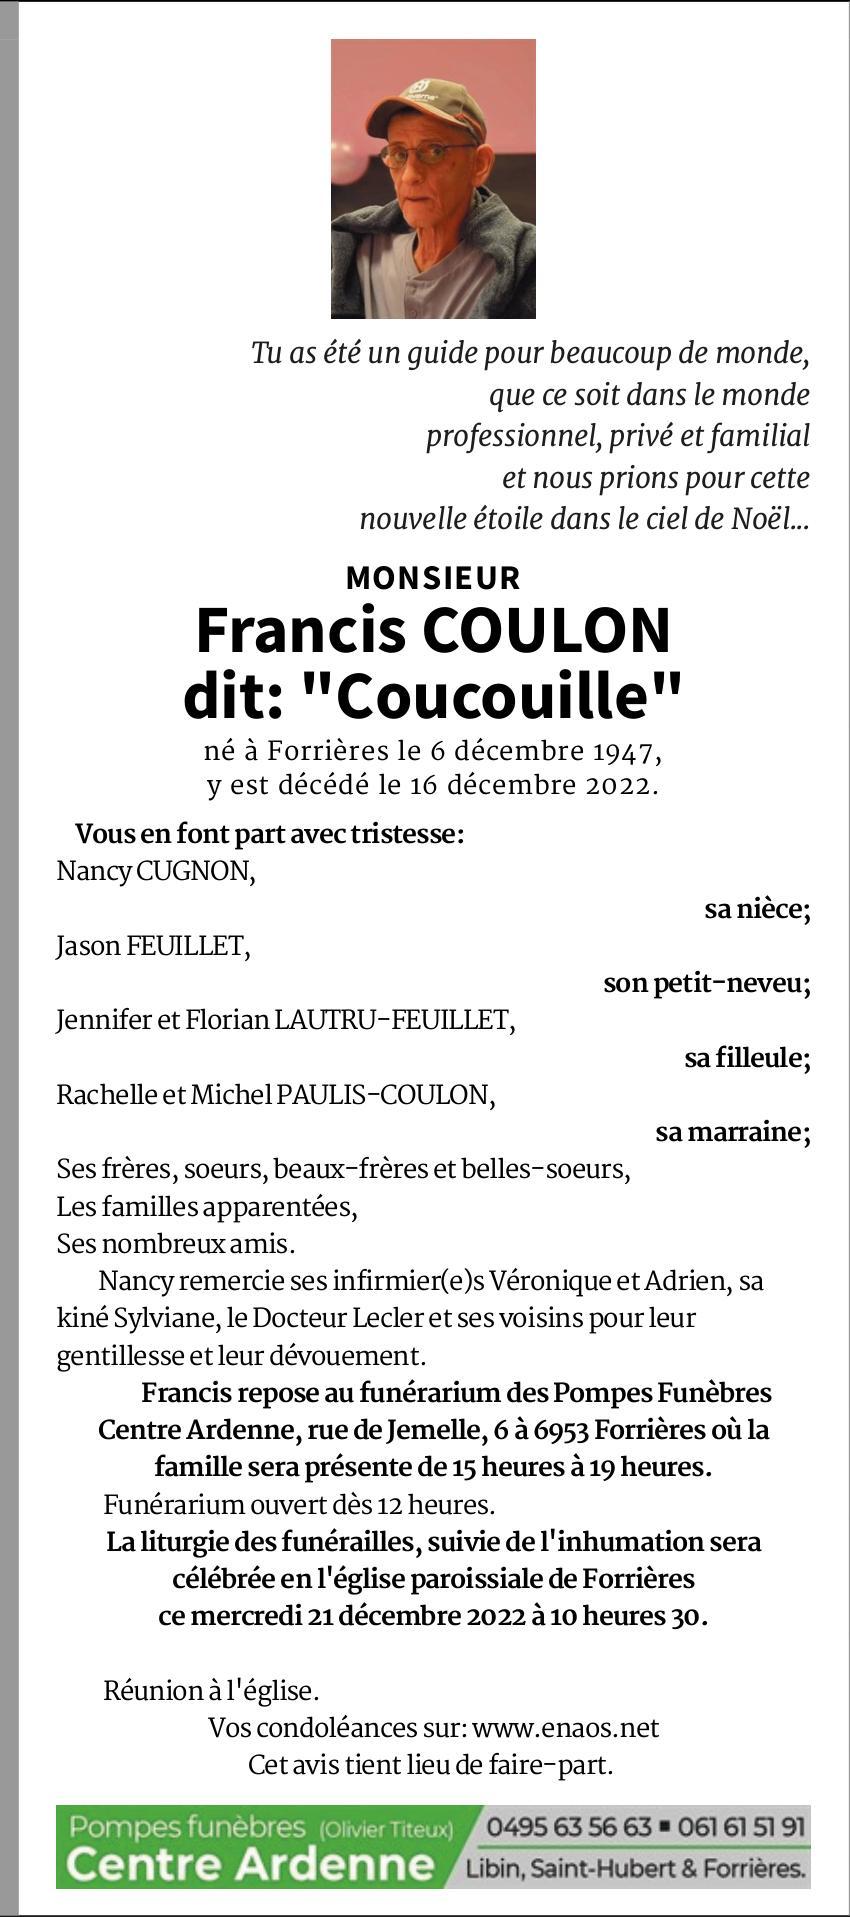 Francis coulon